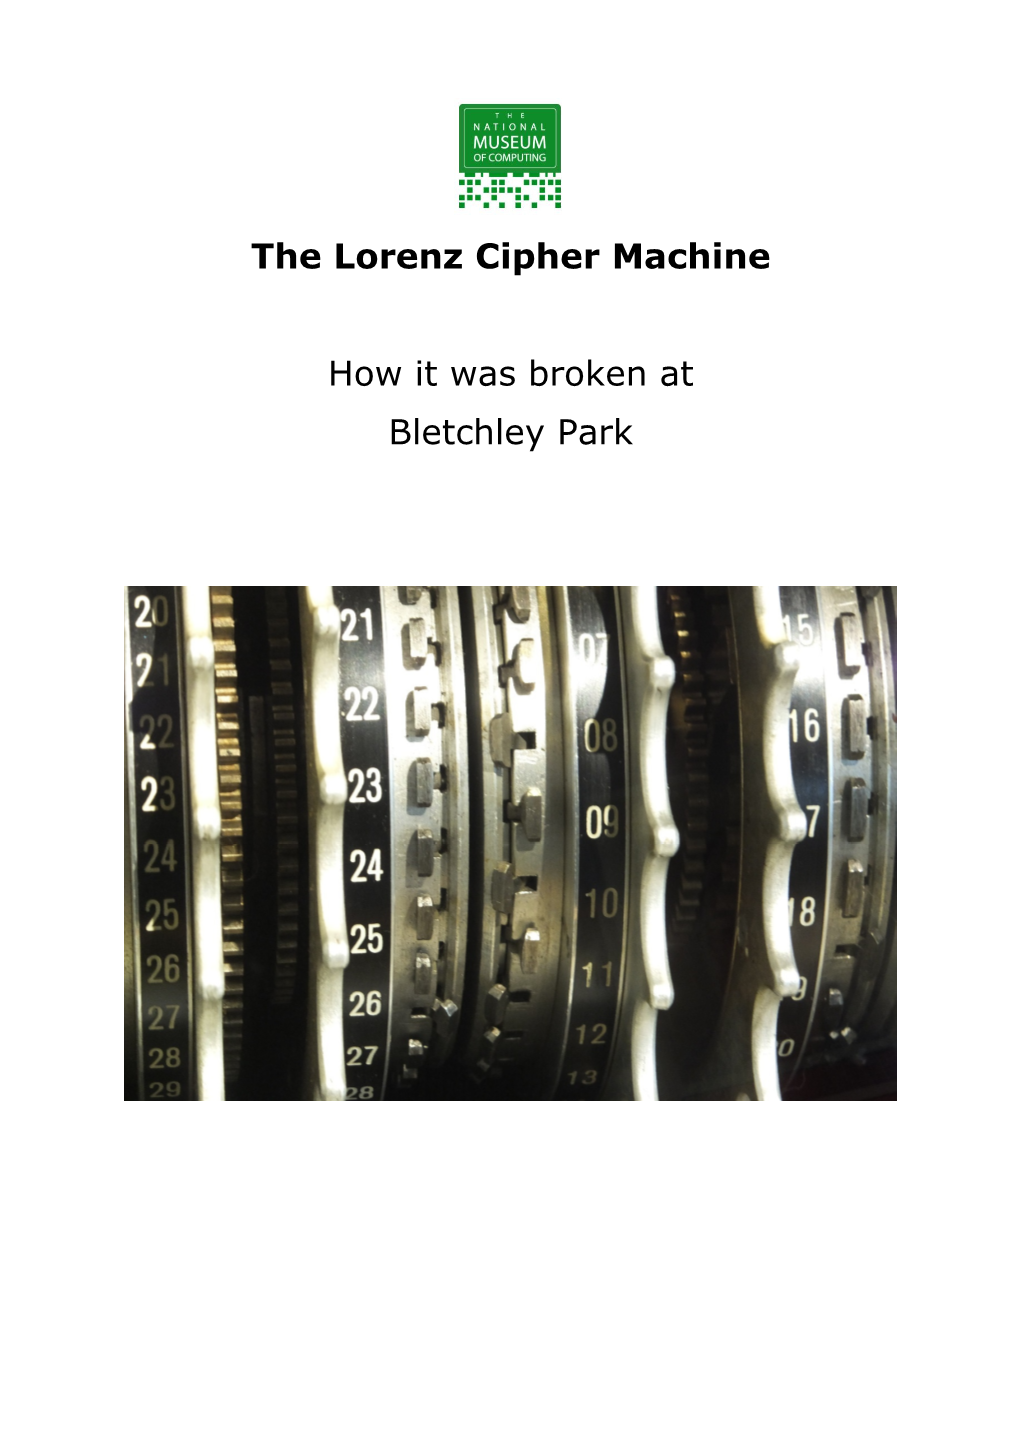 The Lorenz Cipher Machine How It Was Broken at Bletchley Park